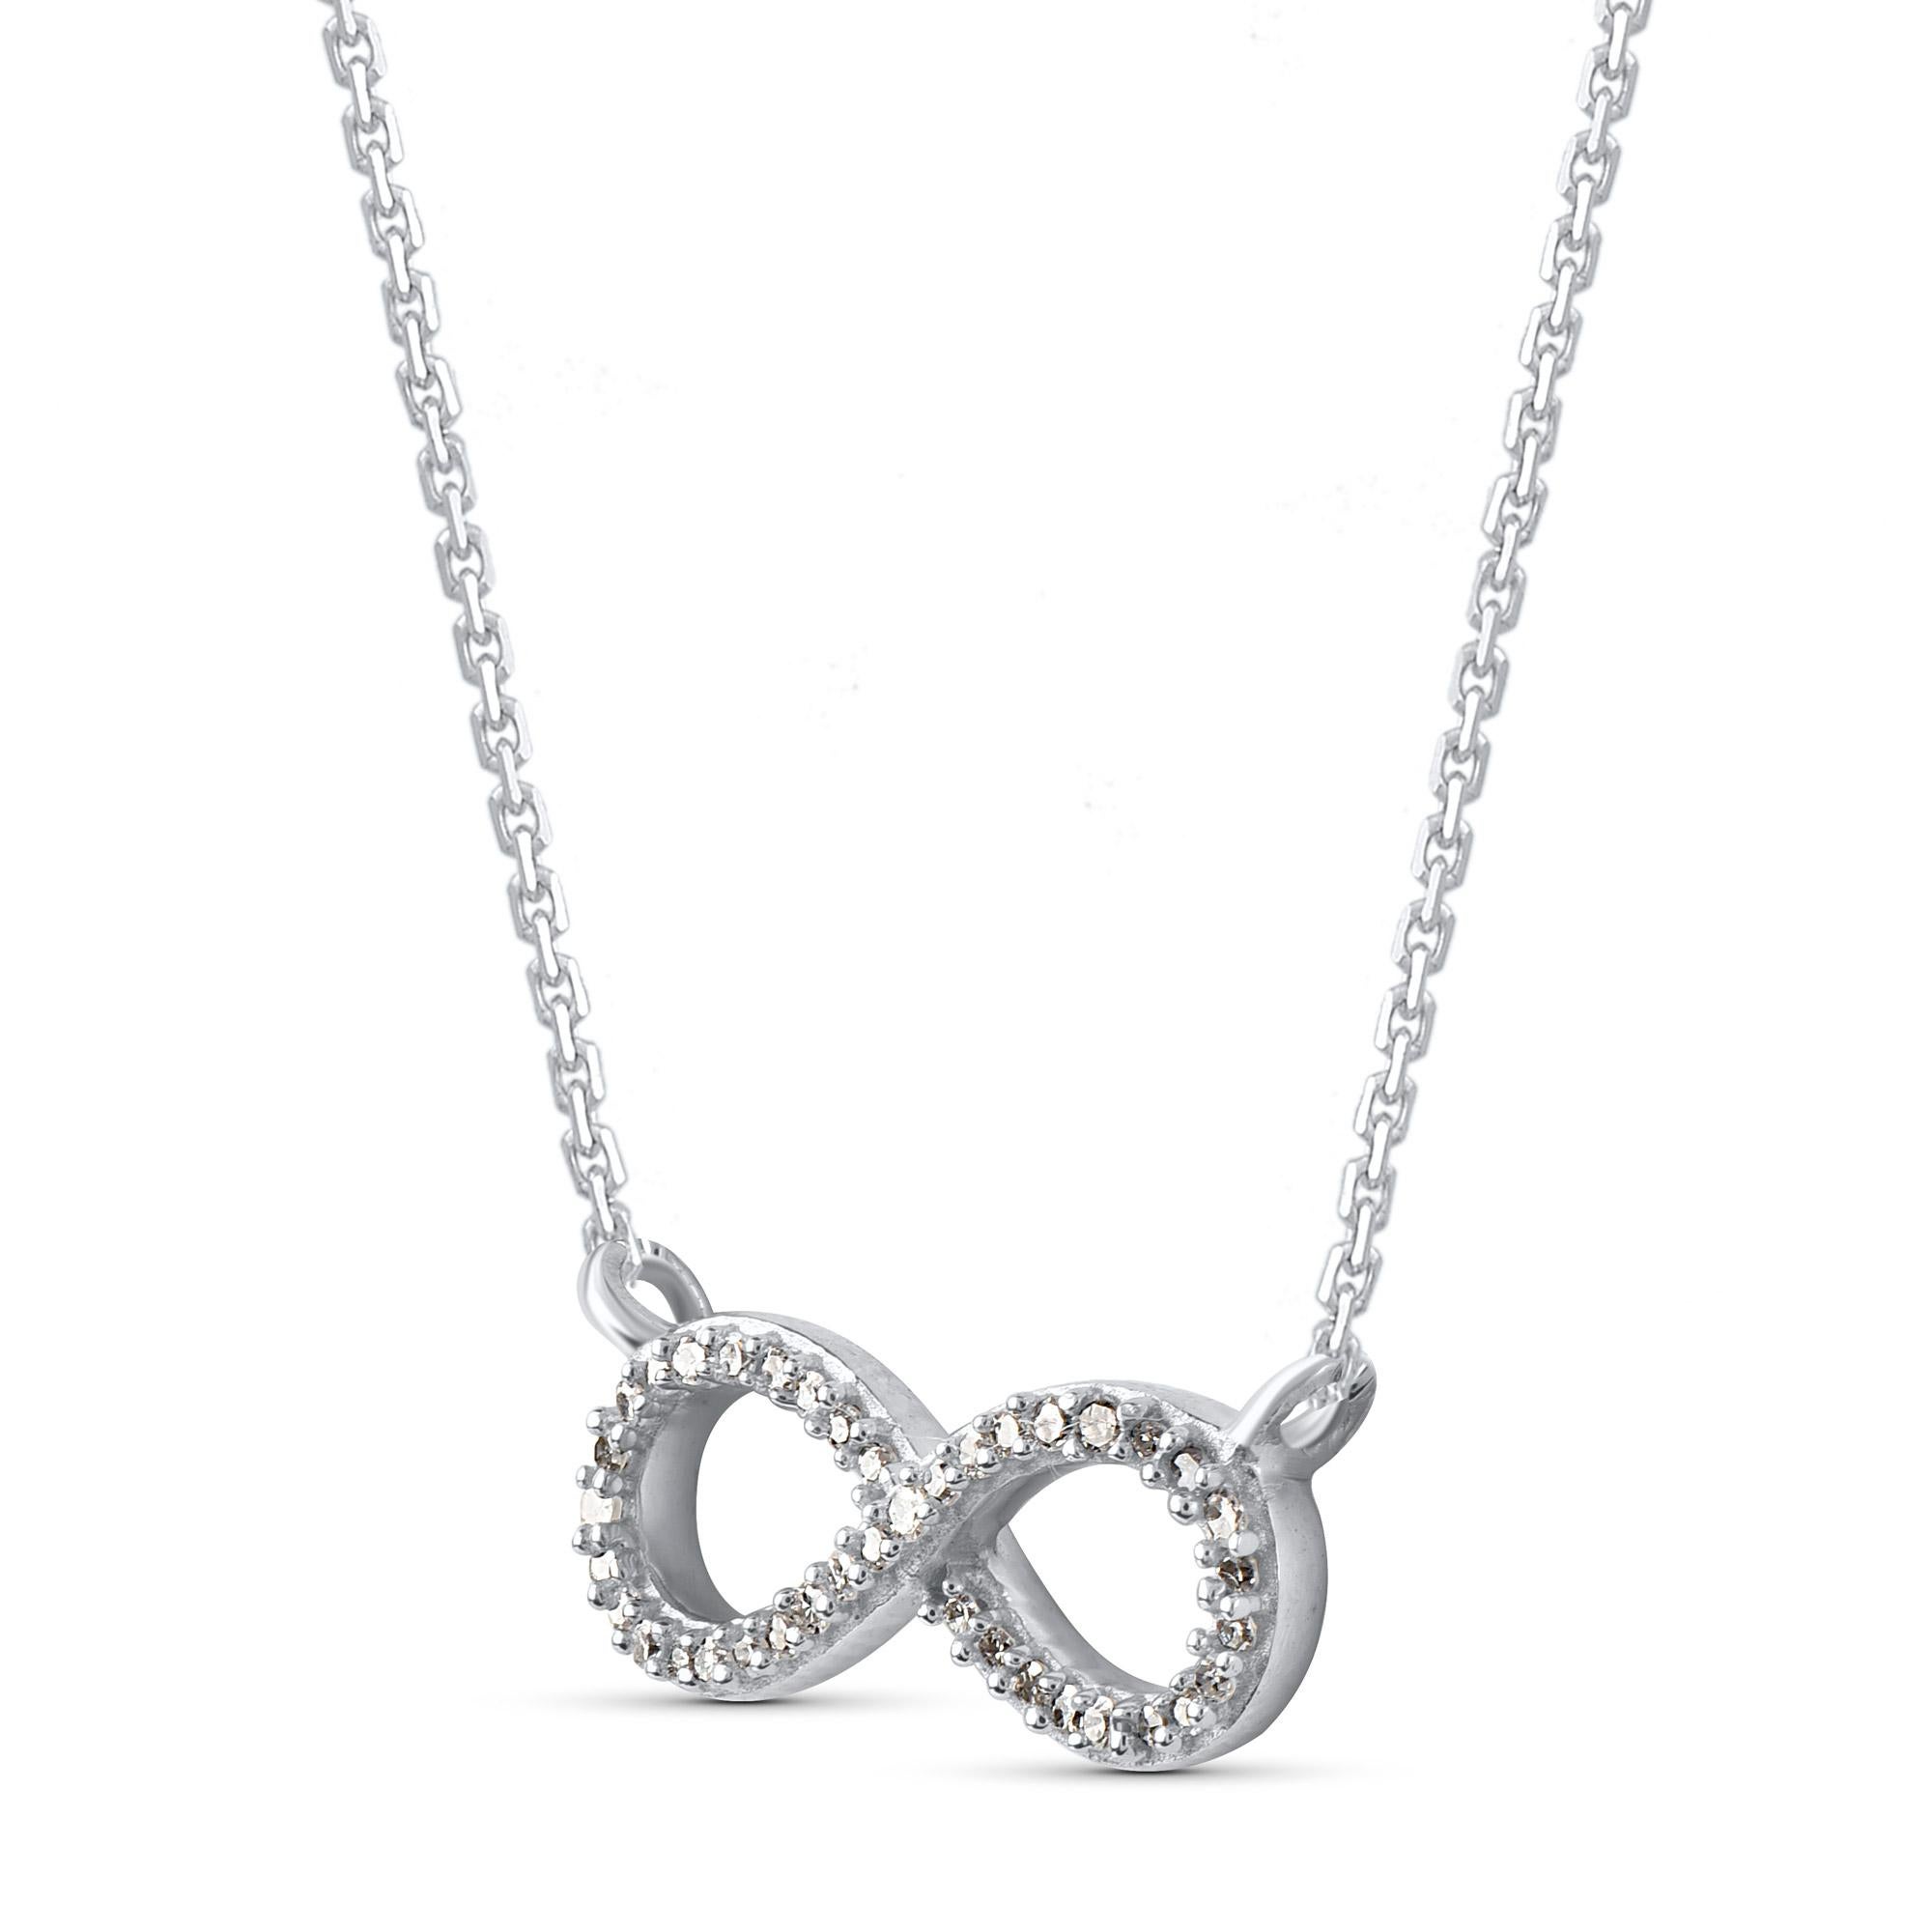 Bring charm to your look with this diamond infinity pendant necklace. The pendant is crafted from 14-karat white gold and features round single cut 39 white diamonds in prong set, H-I color I2 clarity and a high polish finish complete the brilliant